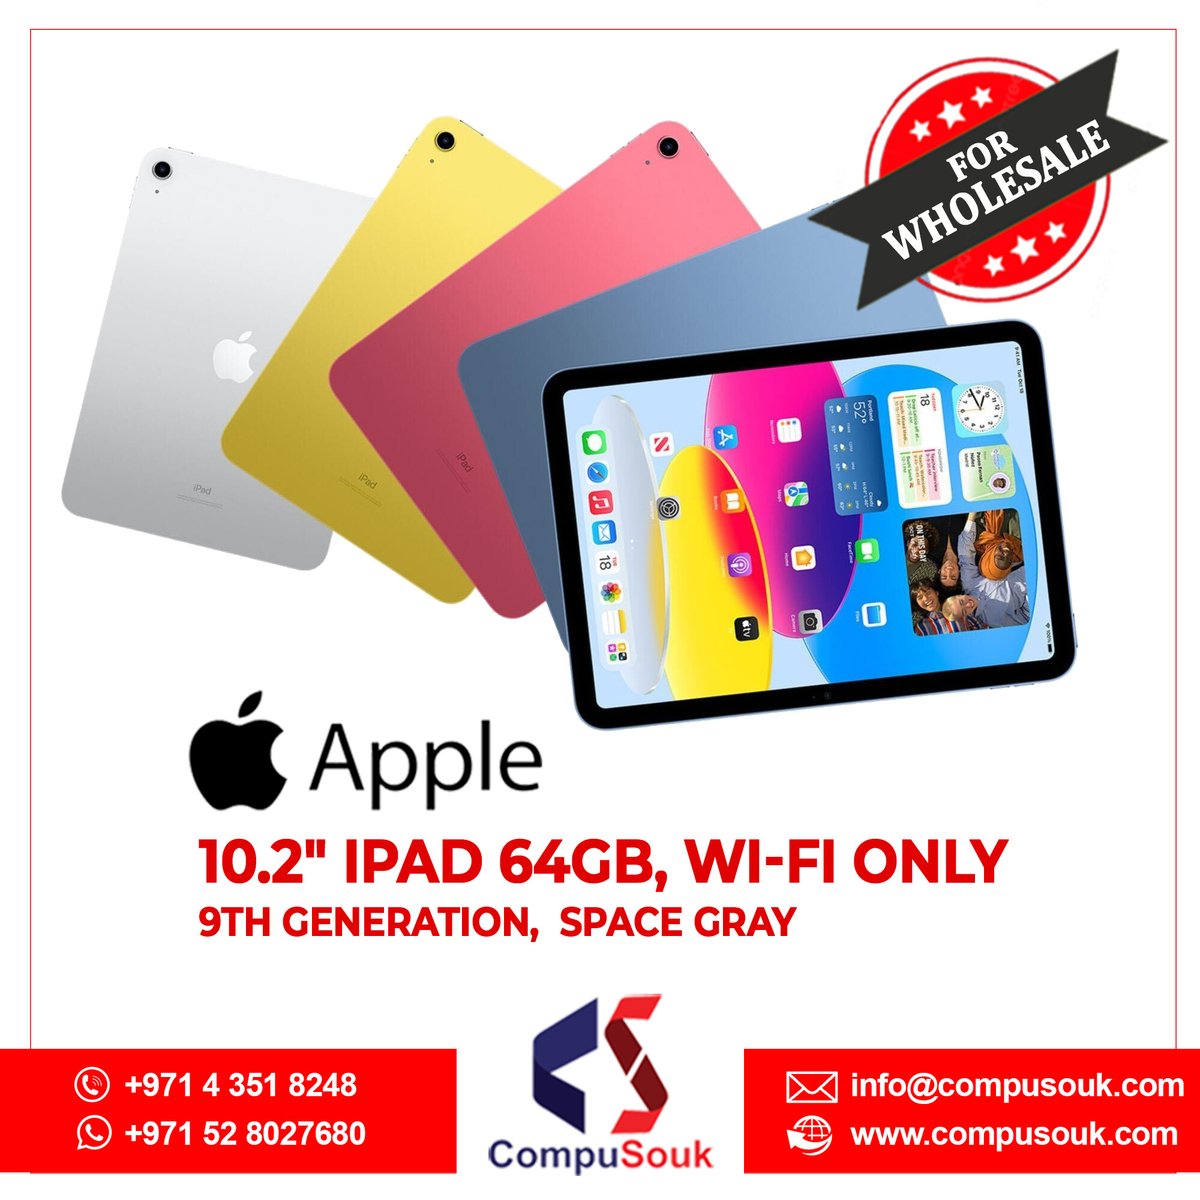 📣 For Bulk Buyers - Bulk Deal
New #Apple 10.2' #iPad (9th Gen, 64GB, Wi-Fi Only, Space Gray)

Visit Deals compusouk.com/daily-deals/

#BulkBuyers #ITTrade #Export #WholesaleSupply #Wholesalers #ITReseller #ITBuyers #ConsumerElectronics #Distributor #WholesaleDeal #Tablet #Tab